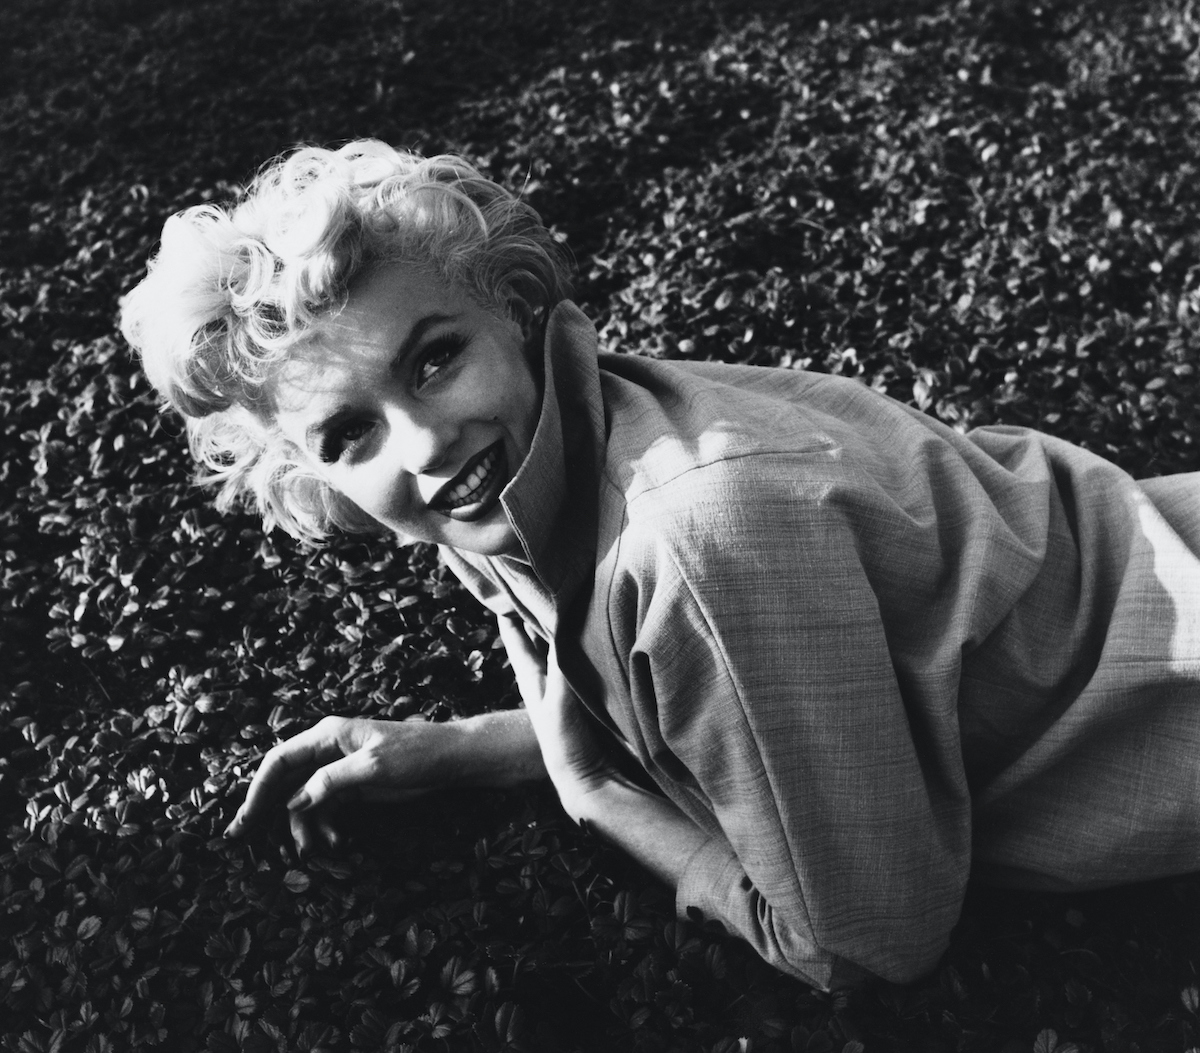 Marilyn Monroe smiling, lying on the grass, in black and white